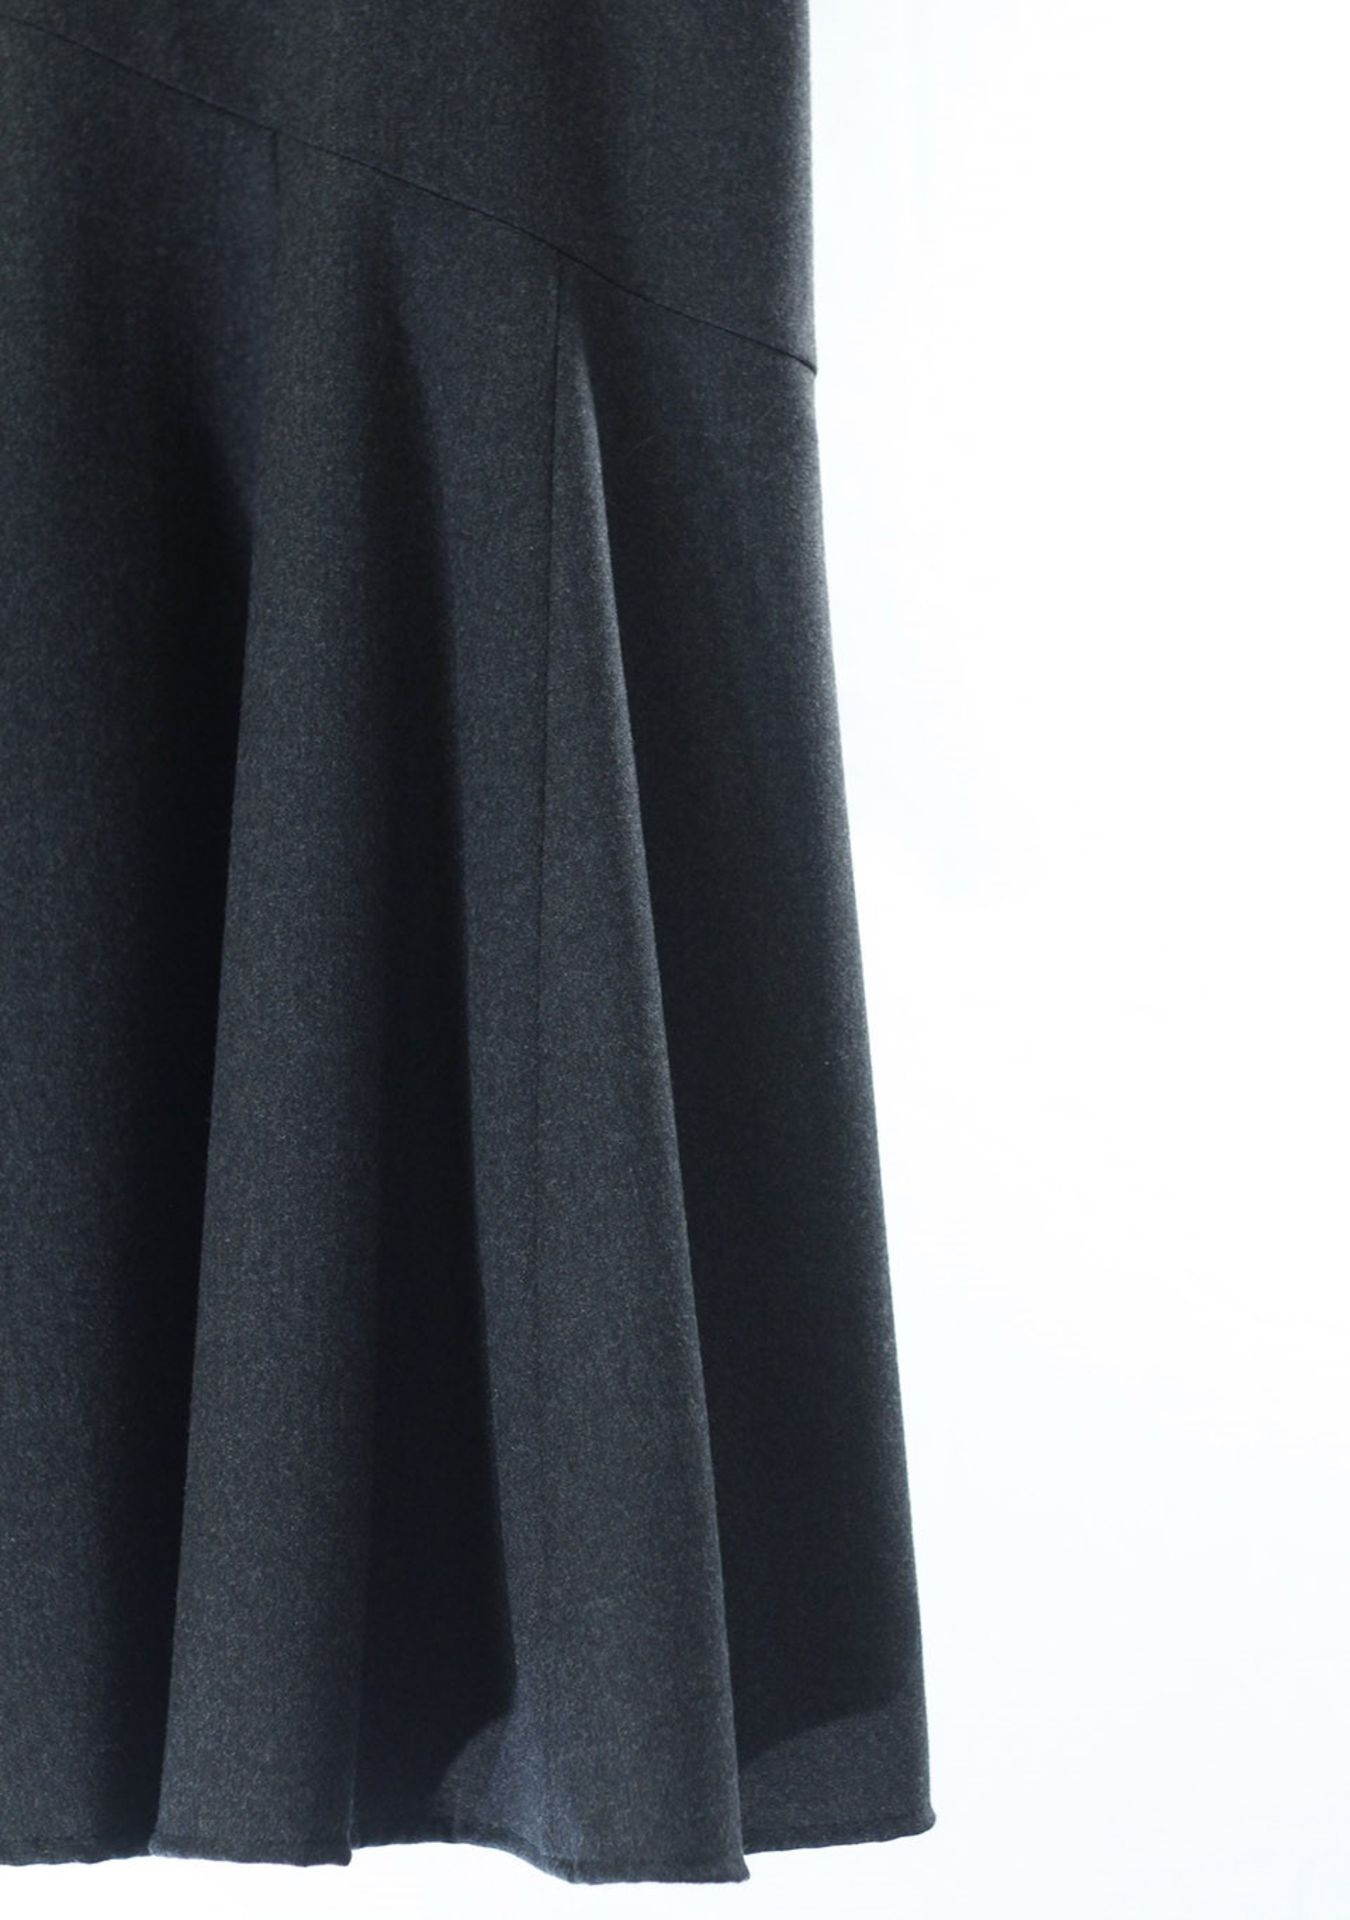 1 x Anne Belin Dark Grey Skirt - Size: 18 - Material: 100% Wool - From a High End Clothing - Image 9 of 9